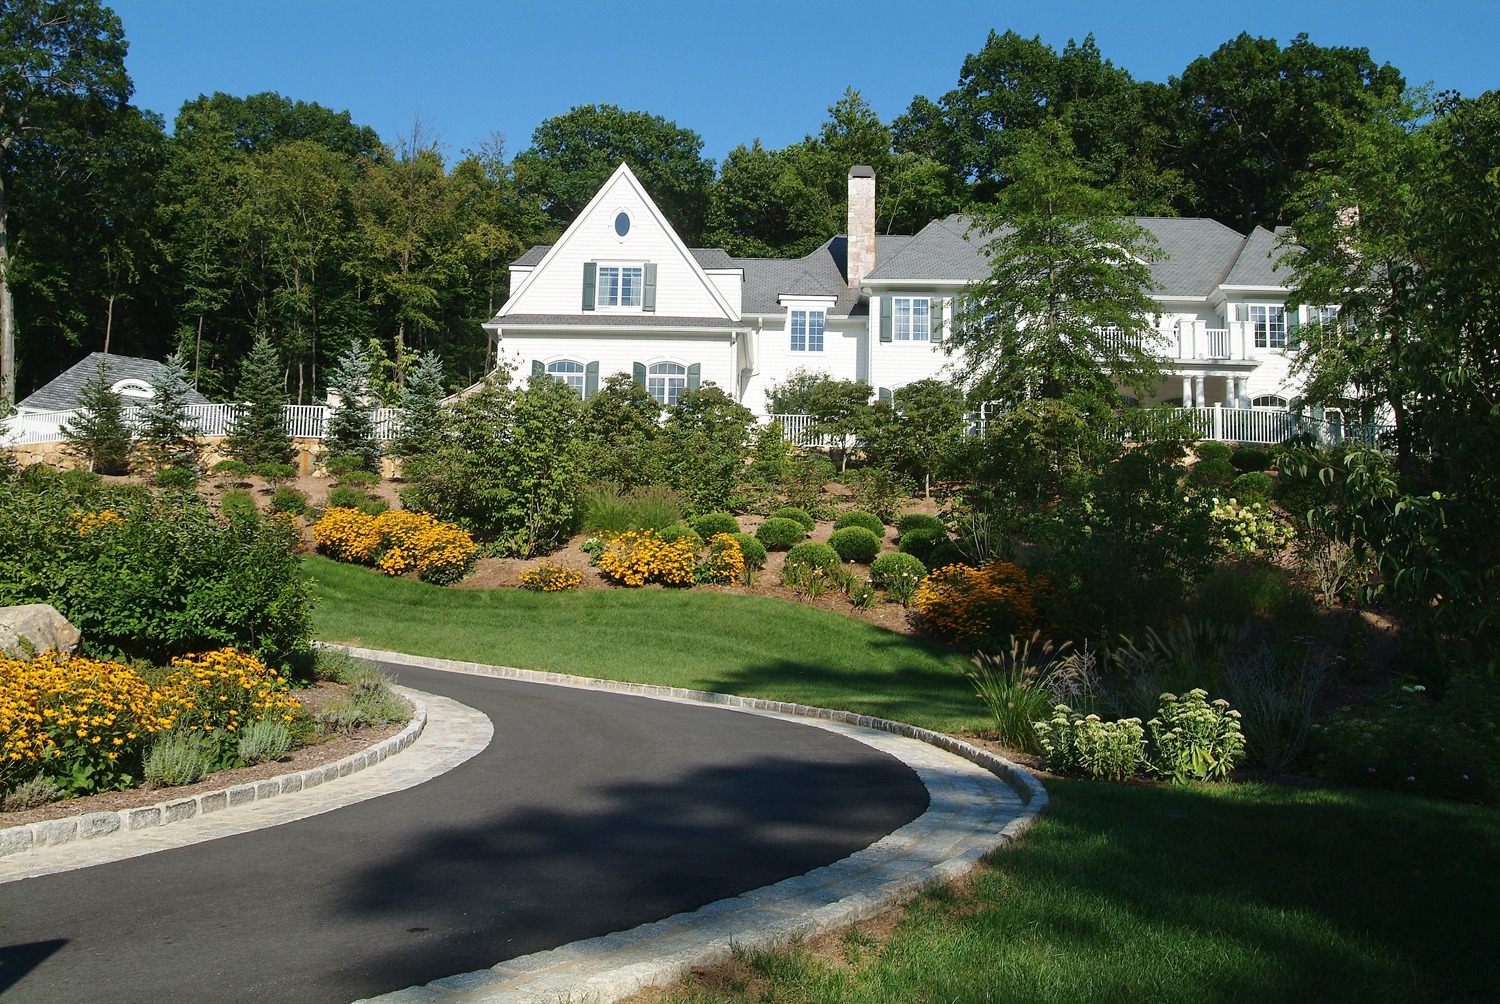 A large white house with a landscaped garden, paved driveway, lush greenery, and clear blue skies on a sunny day. No people are visible.